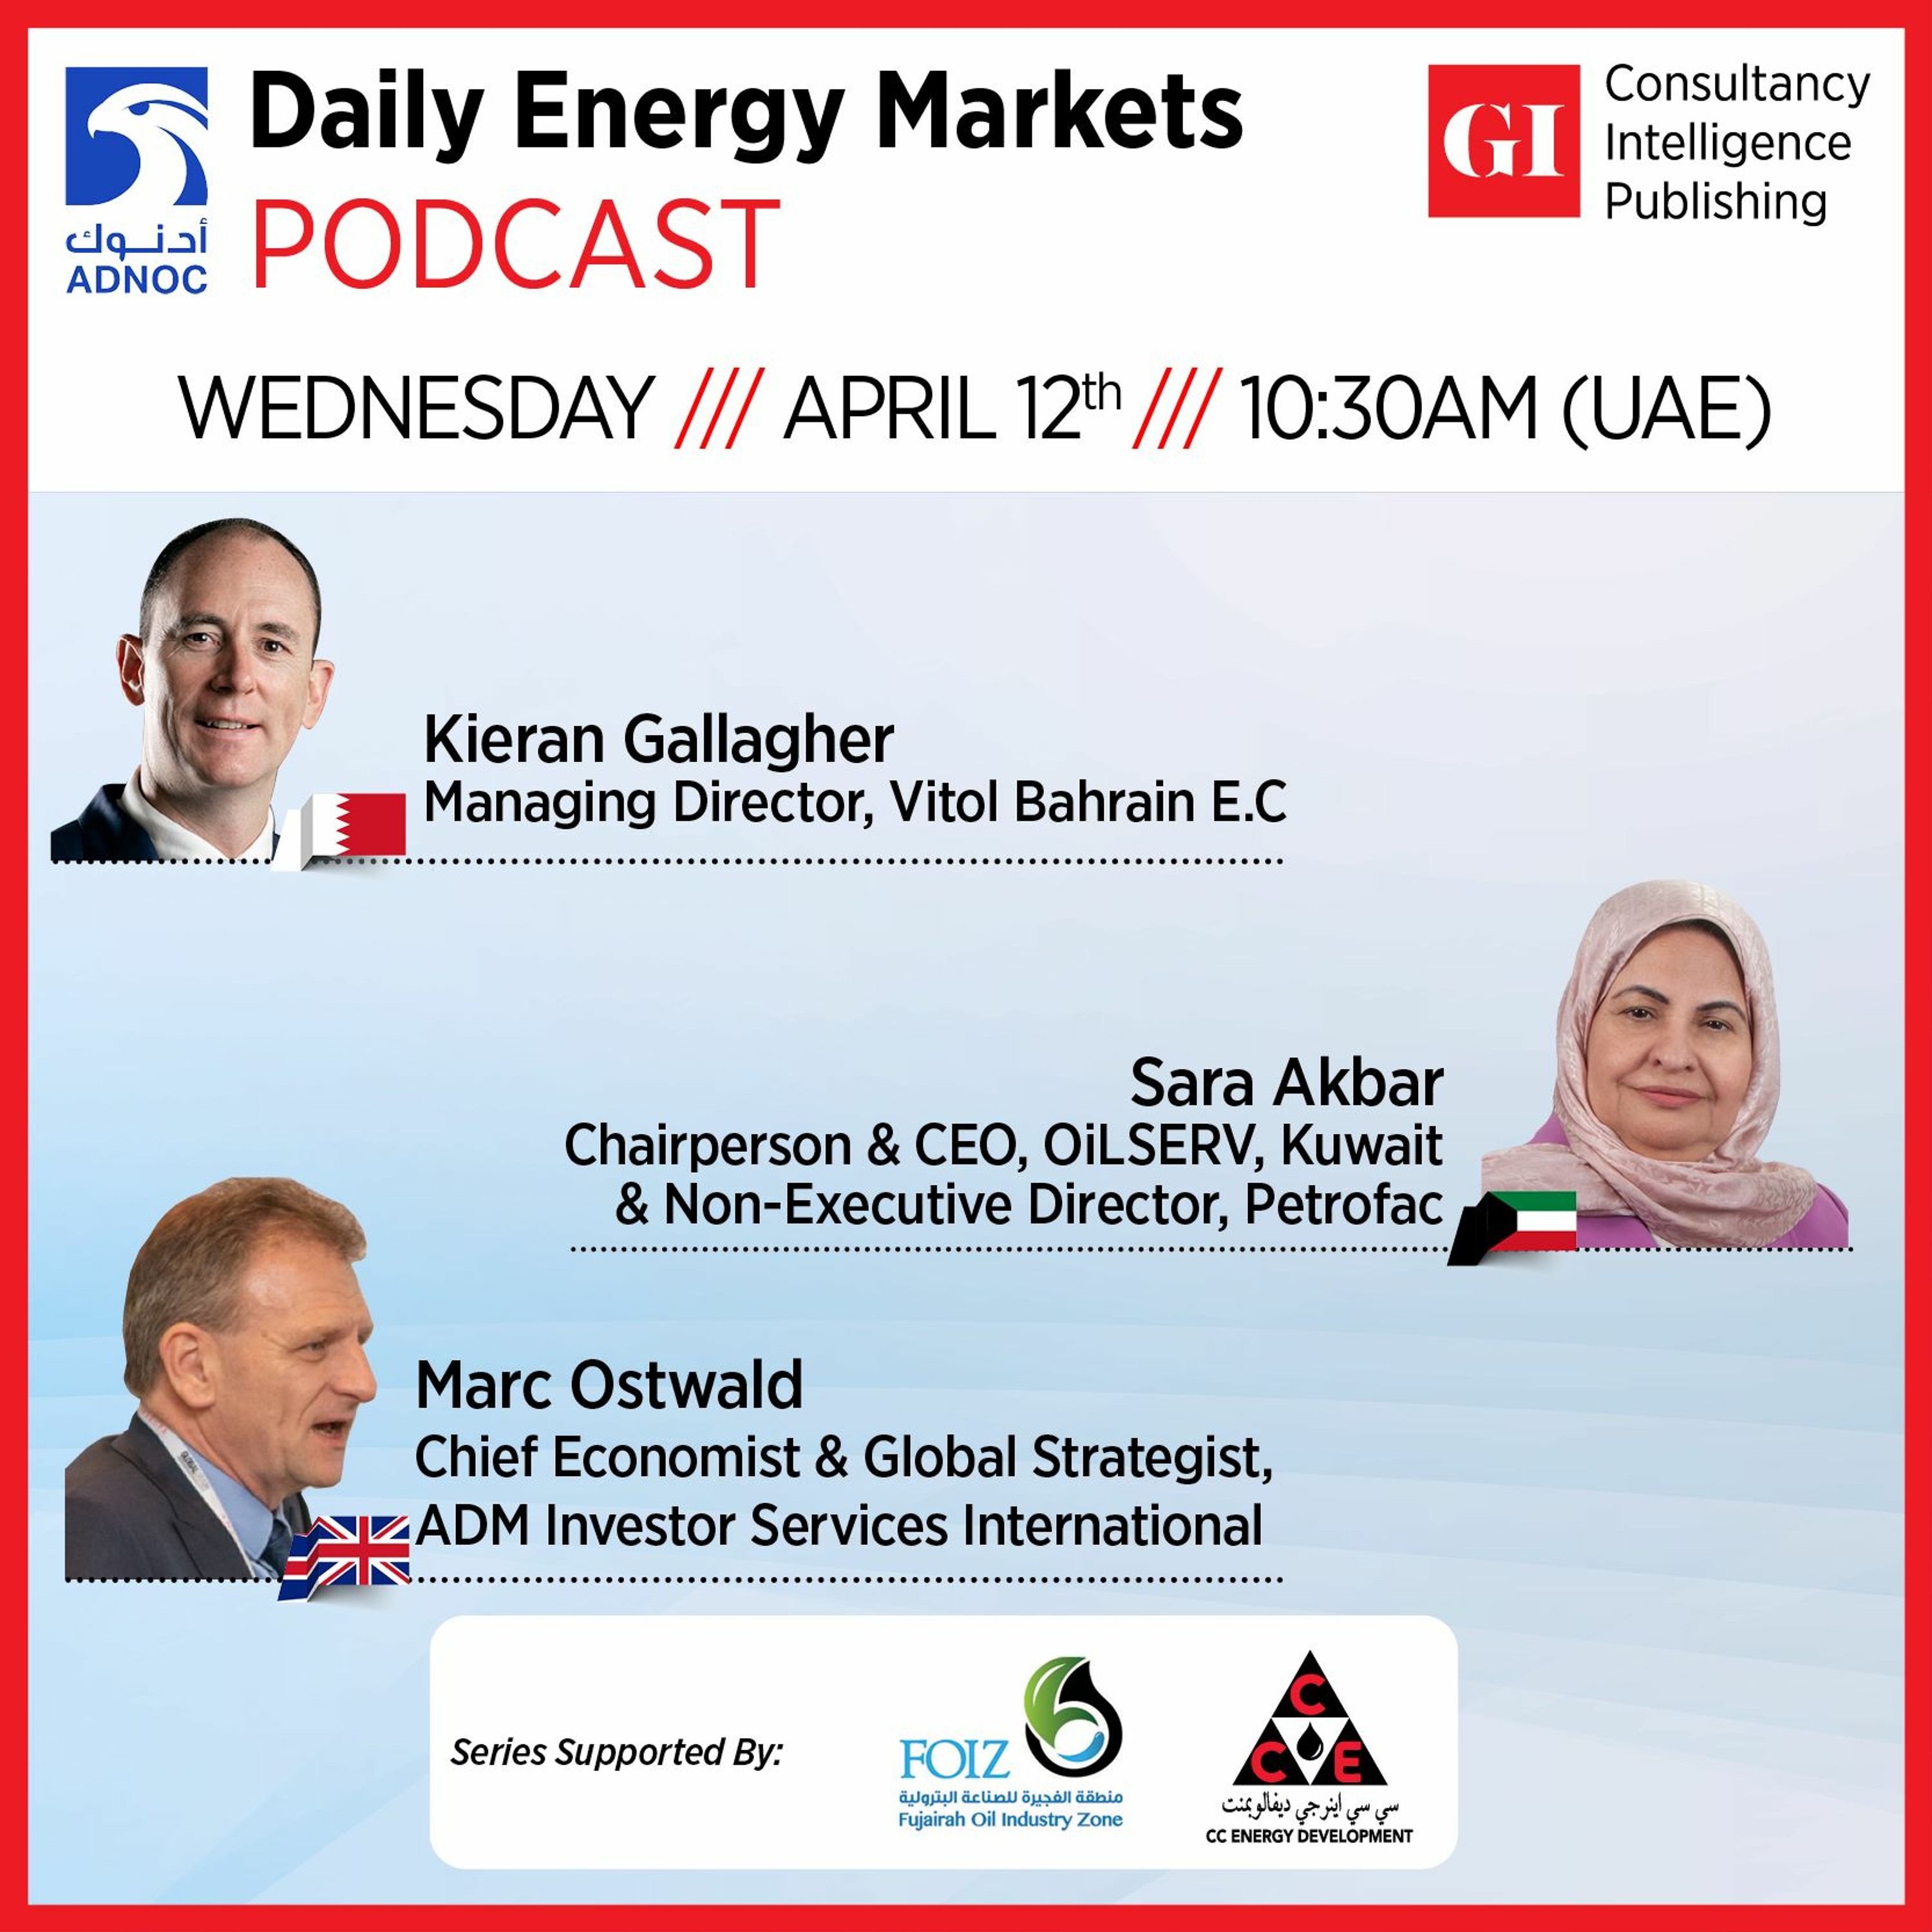 PODCAST: Daily Energy Markets - April 12th